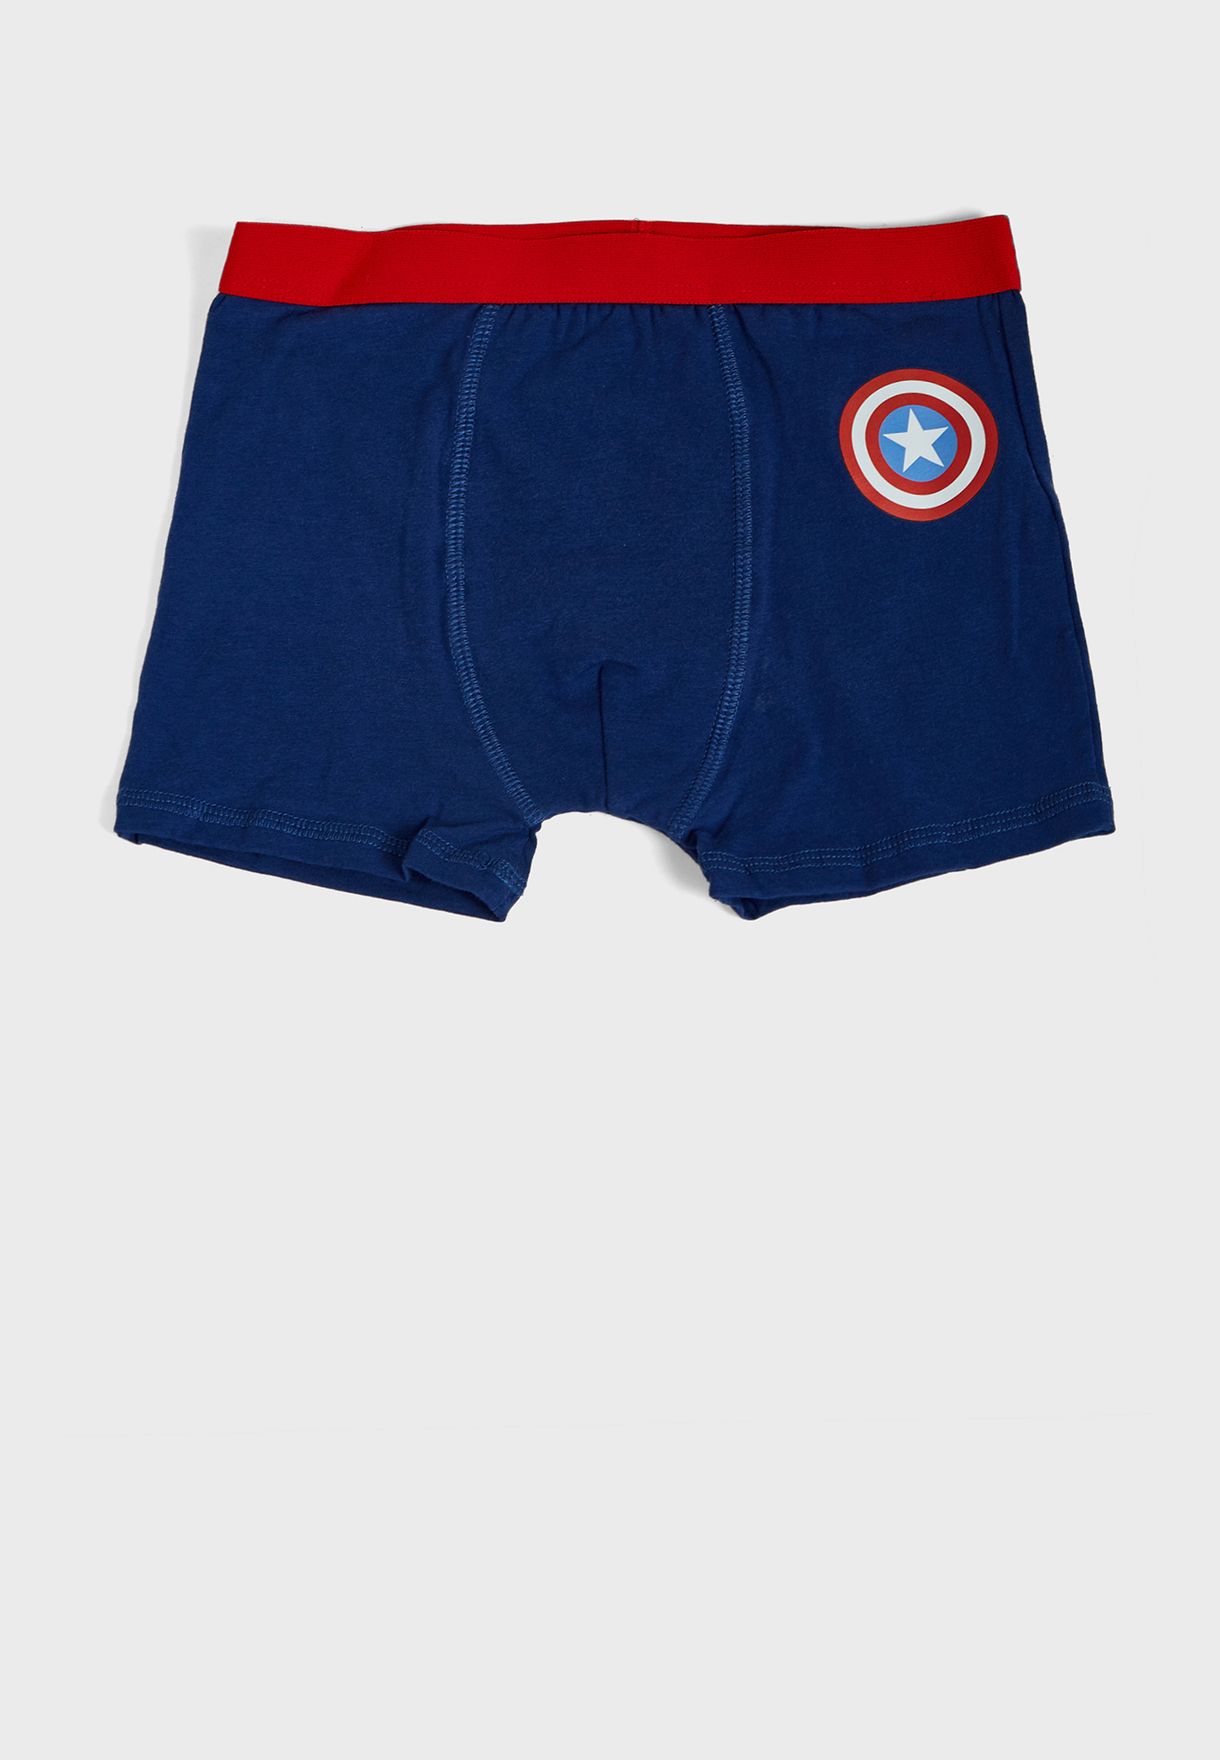 Youth 3 Pack Avengers Boxers